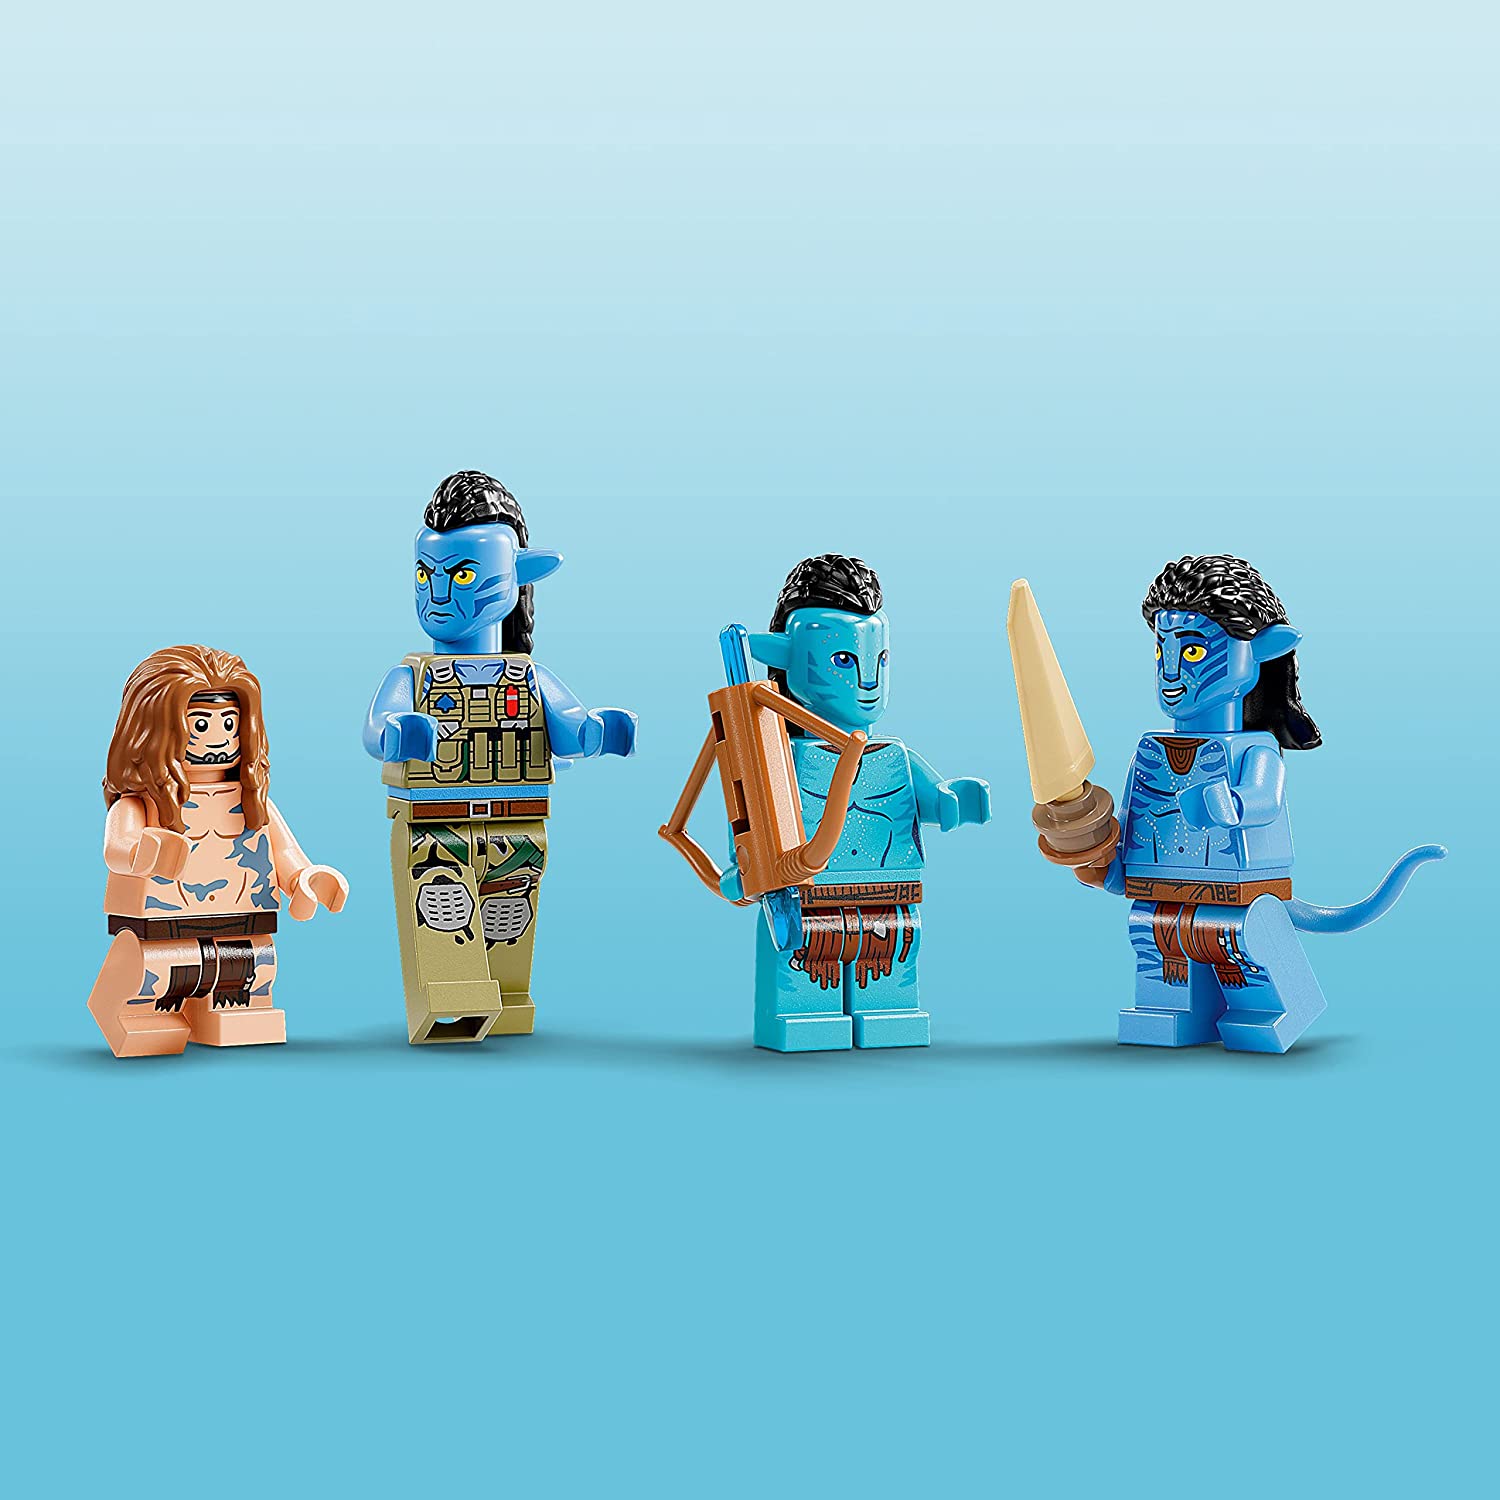 Four Lego figurines which are included with the Avatar: The Way of Water Lego building set.